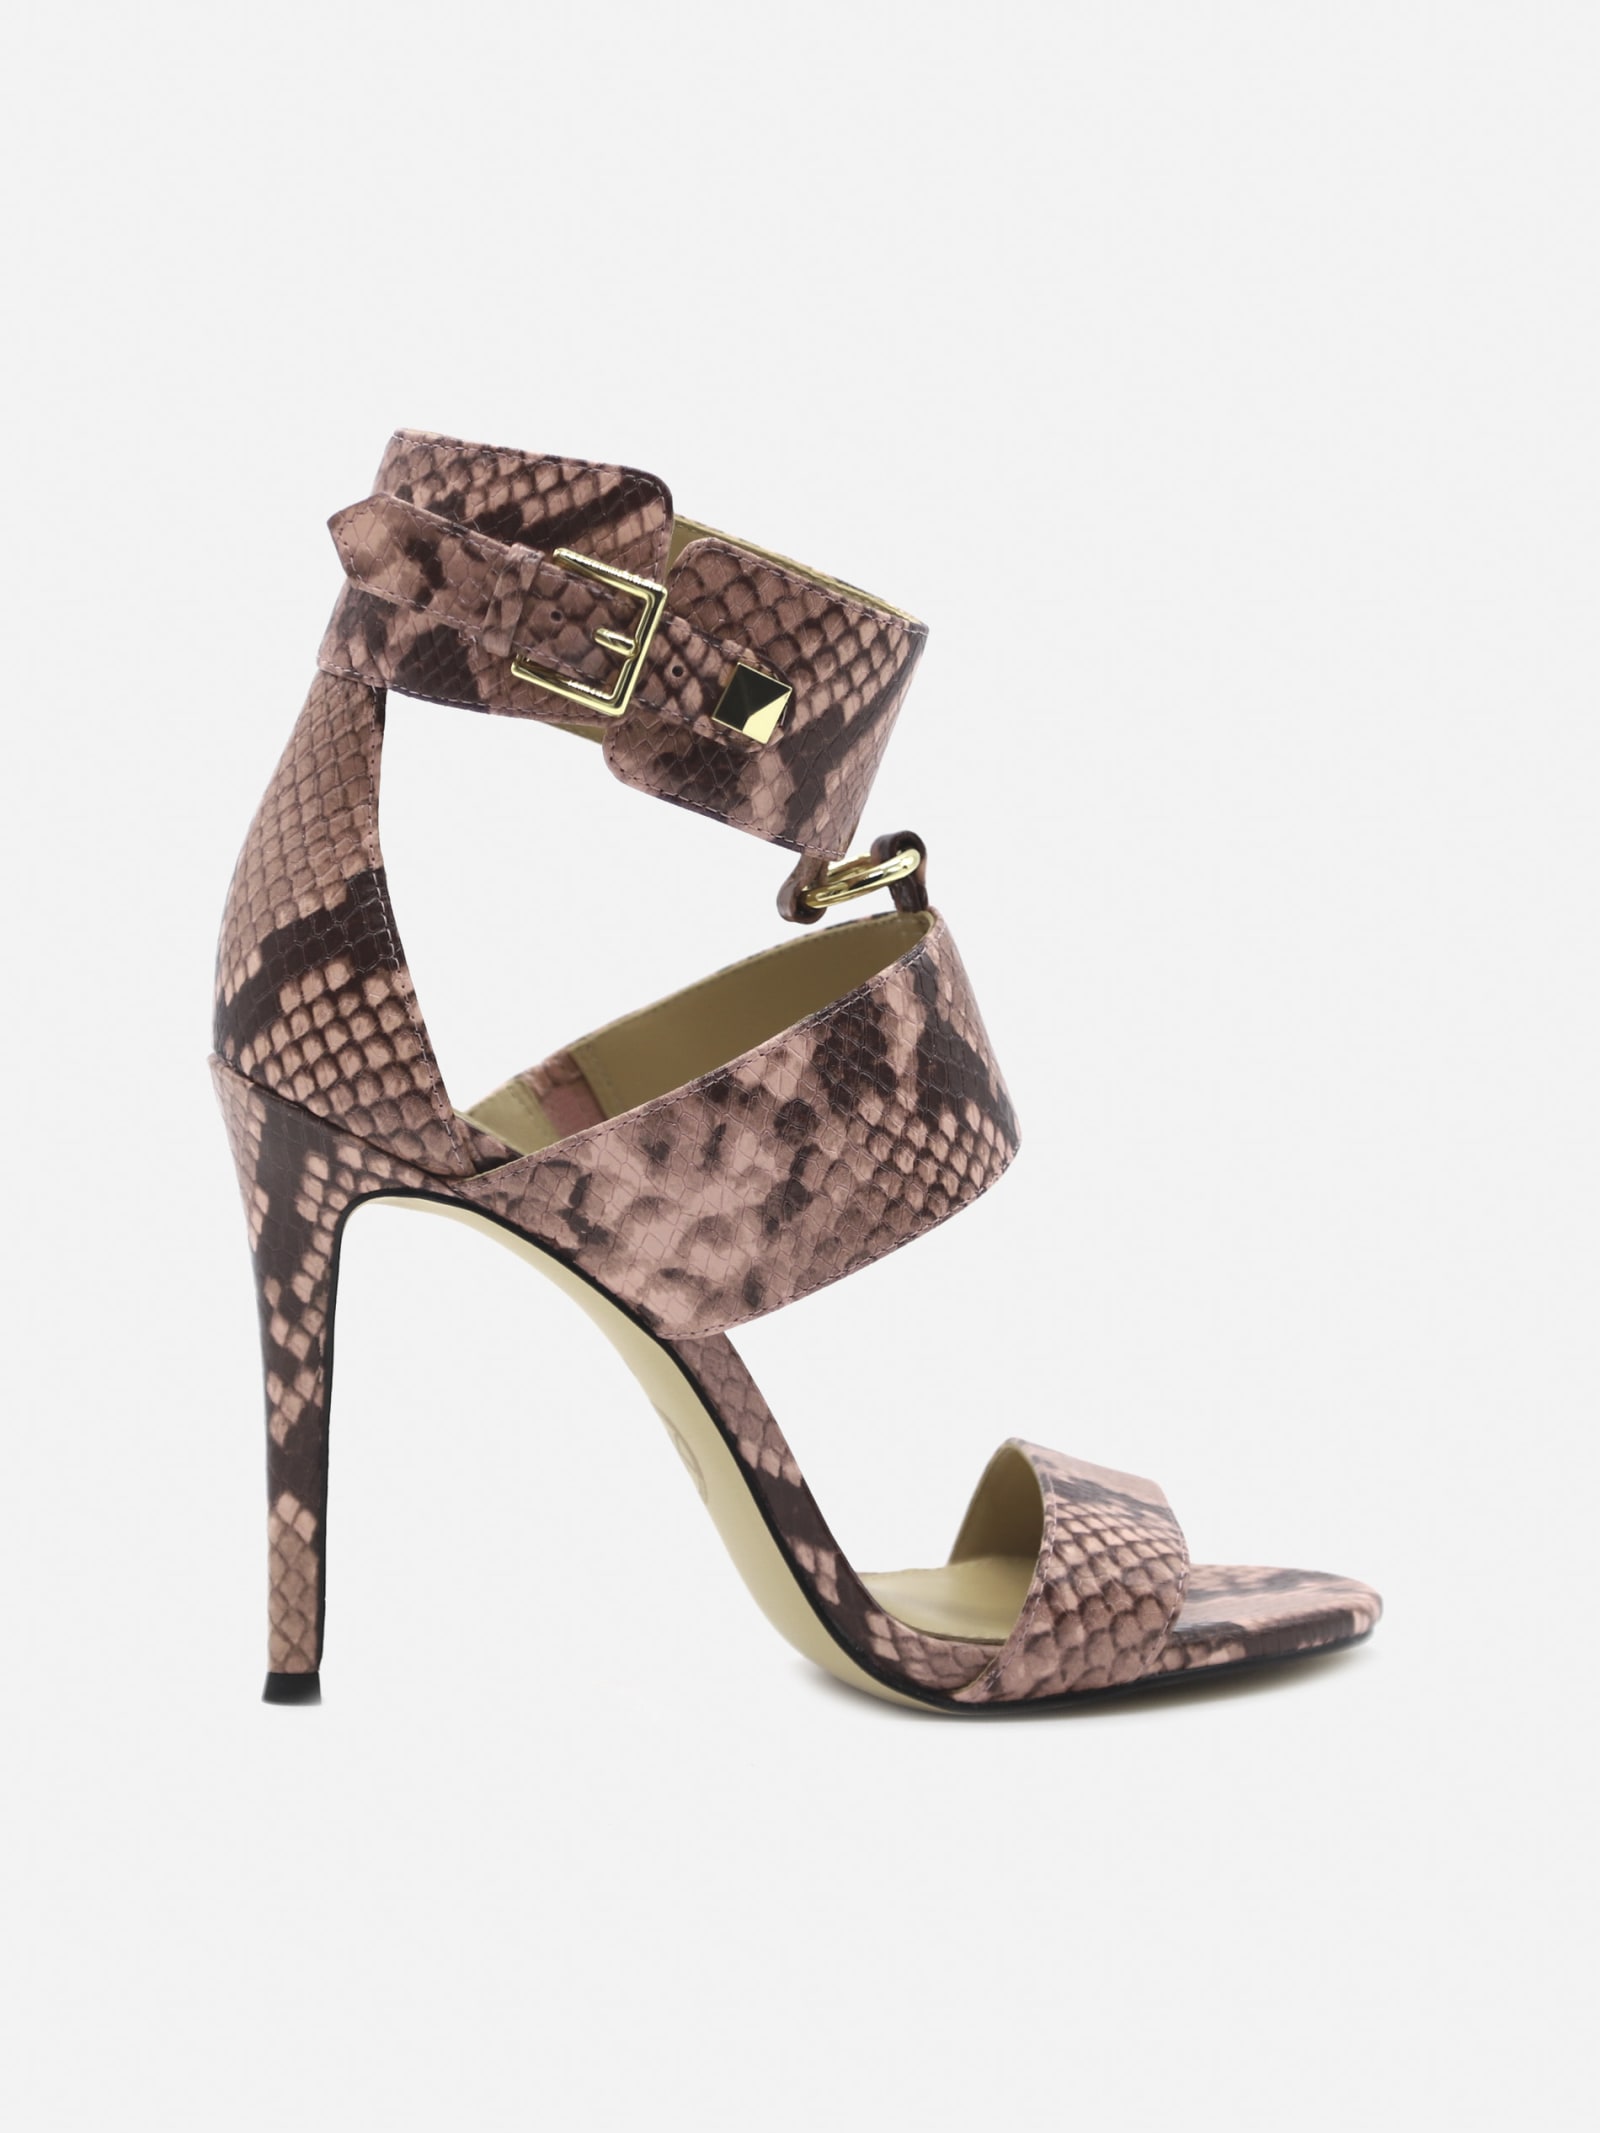 Buy MICHAEL Michael Kors Amos Sandals In Python-effect Leather online, shop MICHAEL Michael Kors shoes with free shipping